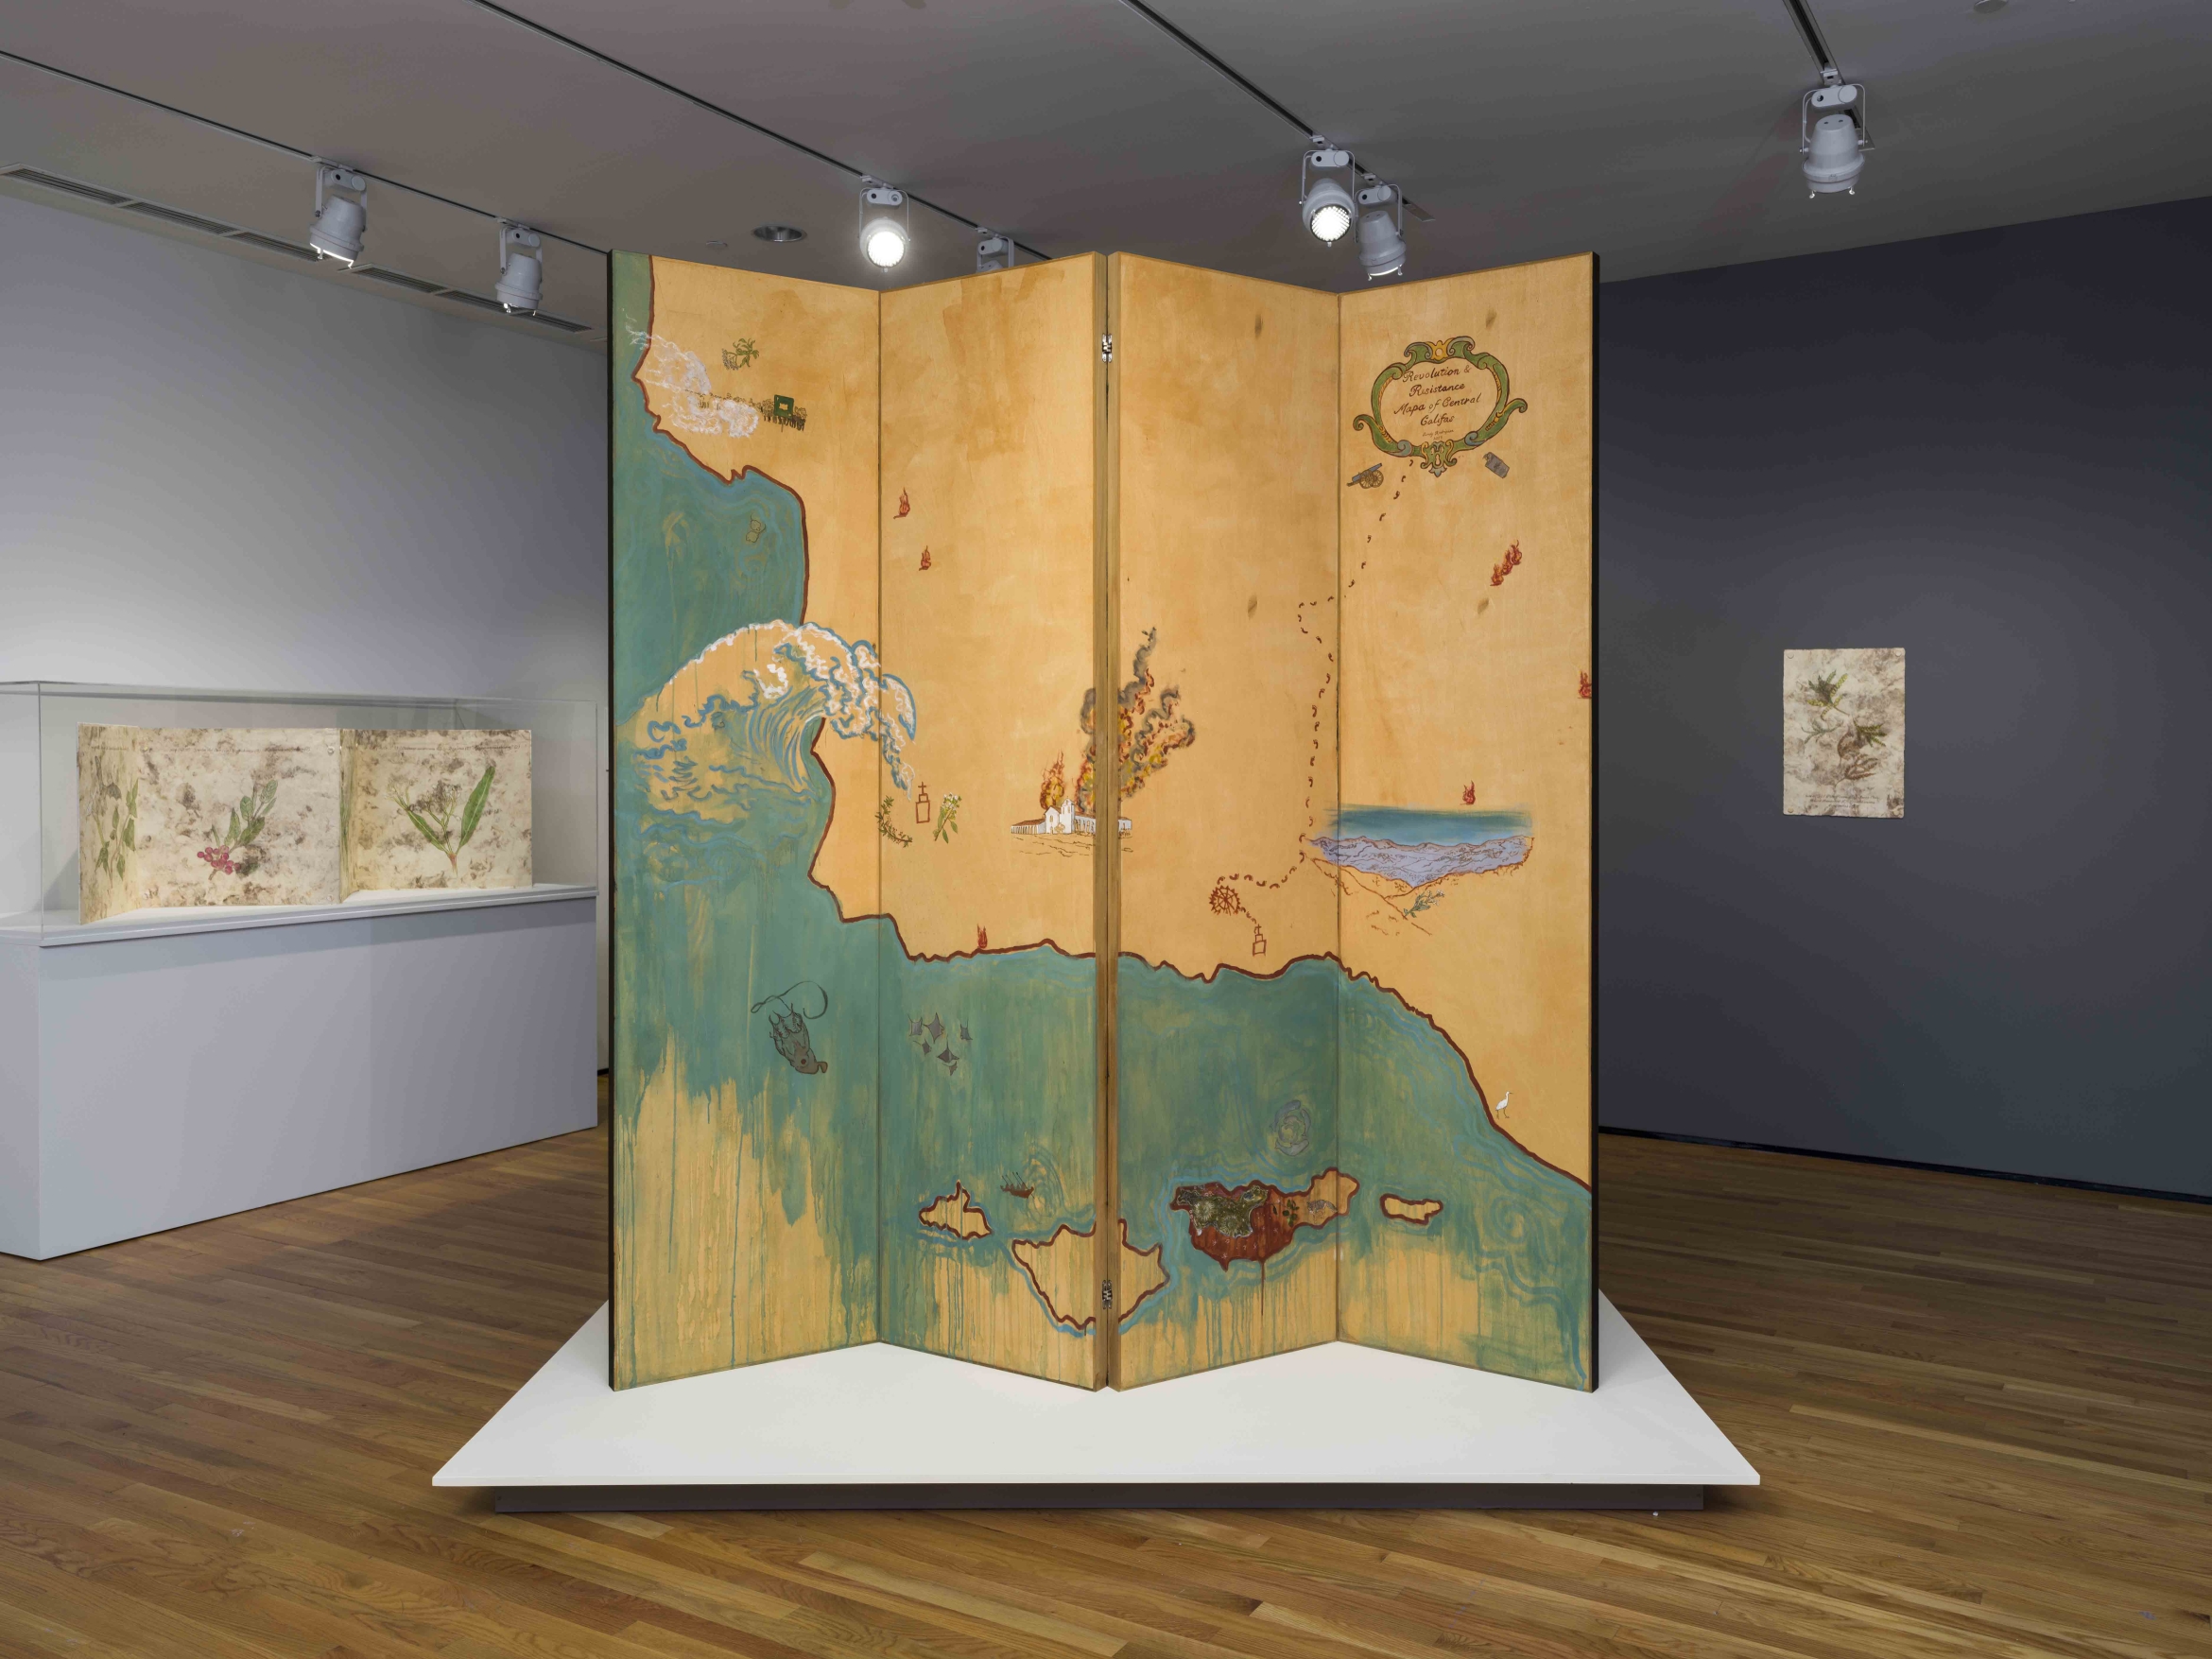 A large, artist-created map standing in the middle of a gallery